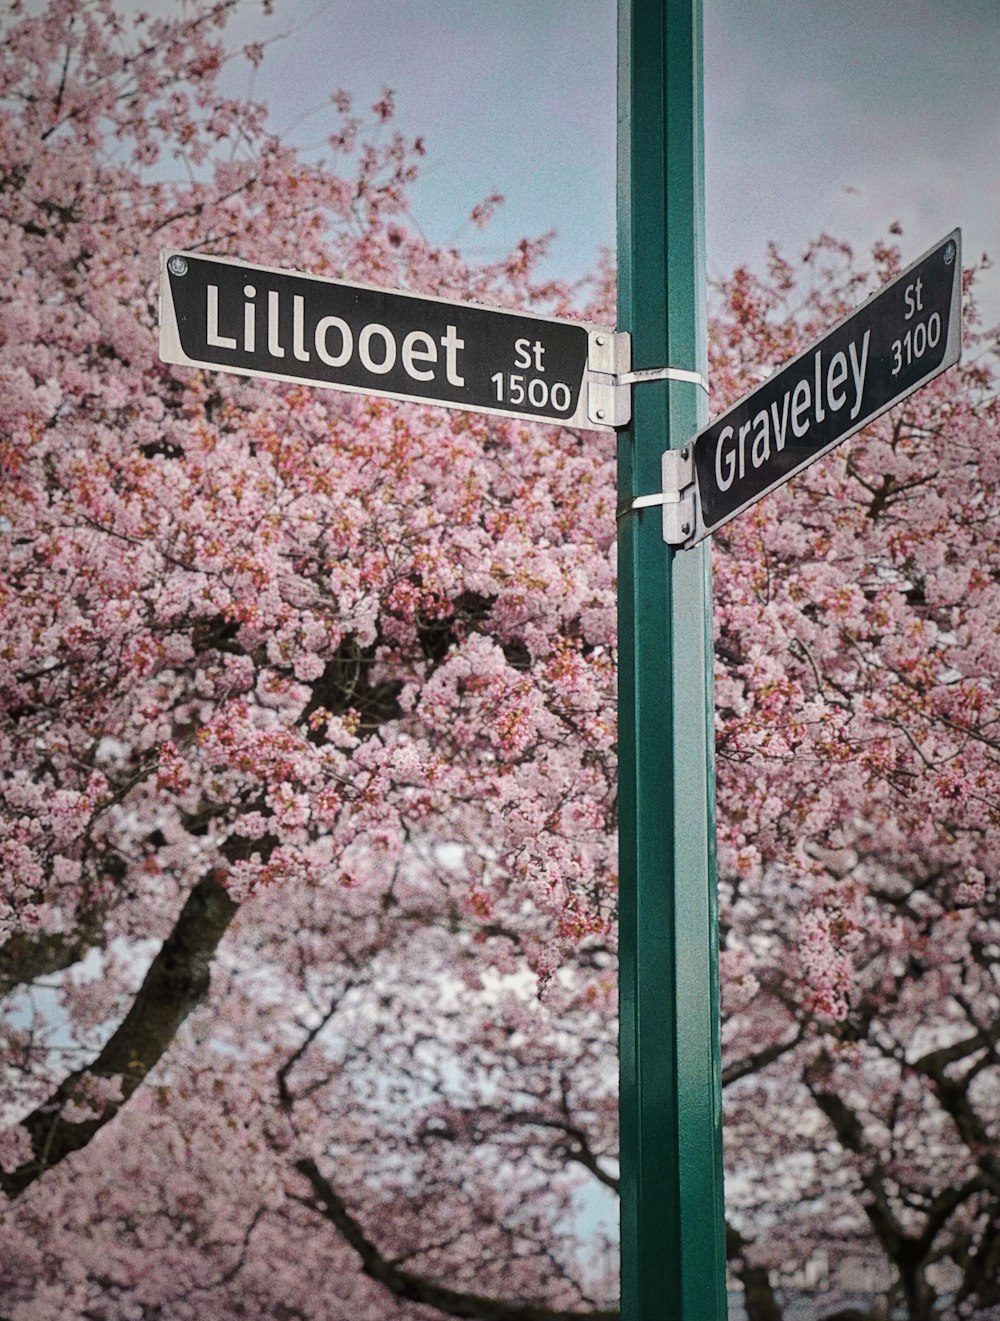 a street sign on a pole with a tree in the background